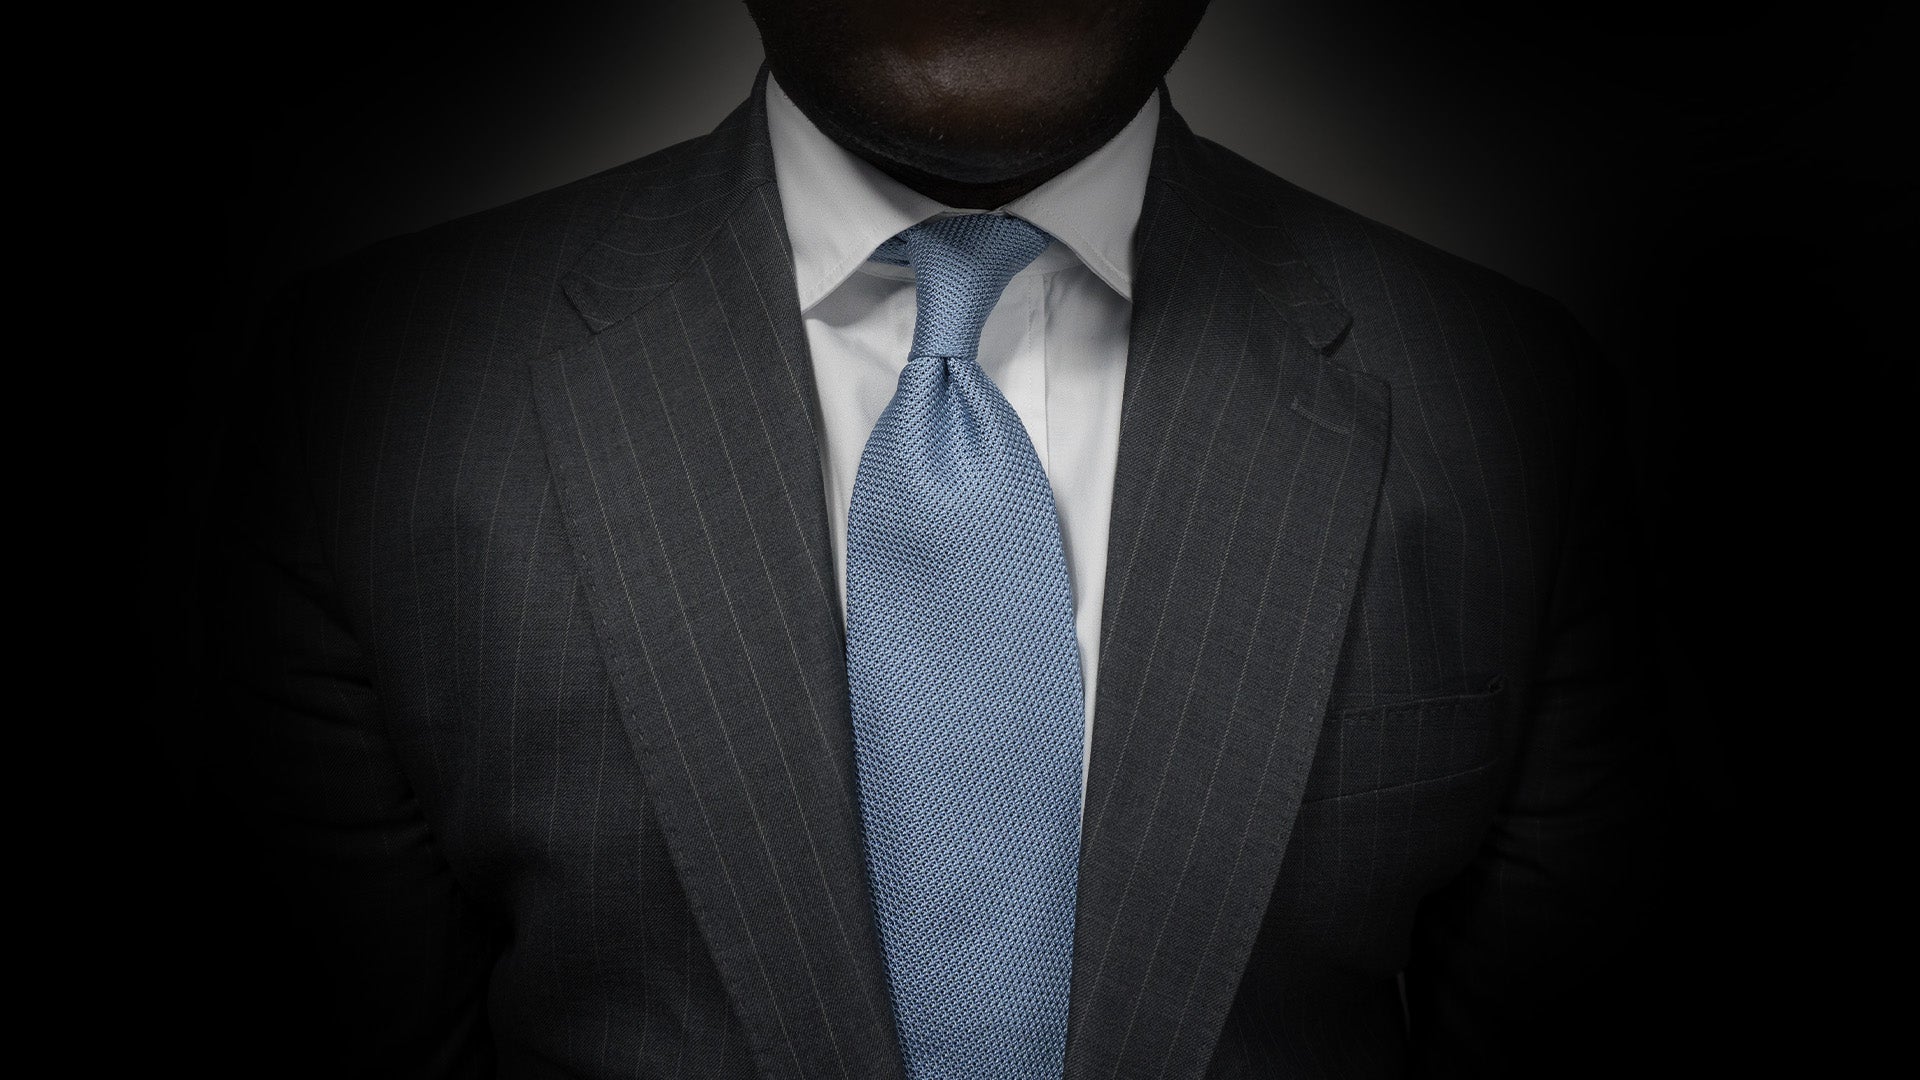 Ways to Make a Sky Blue Tie Part of a Dynamite Outfit